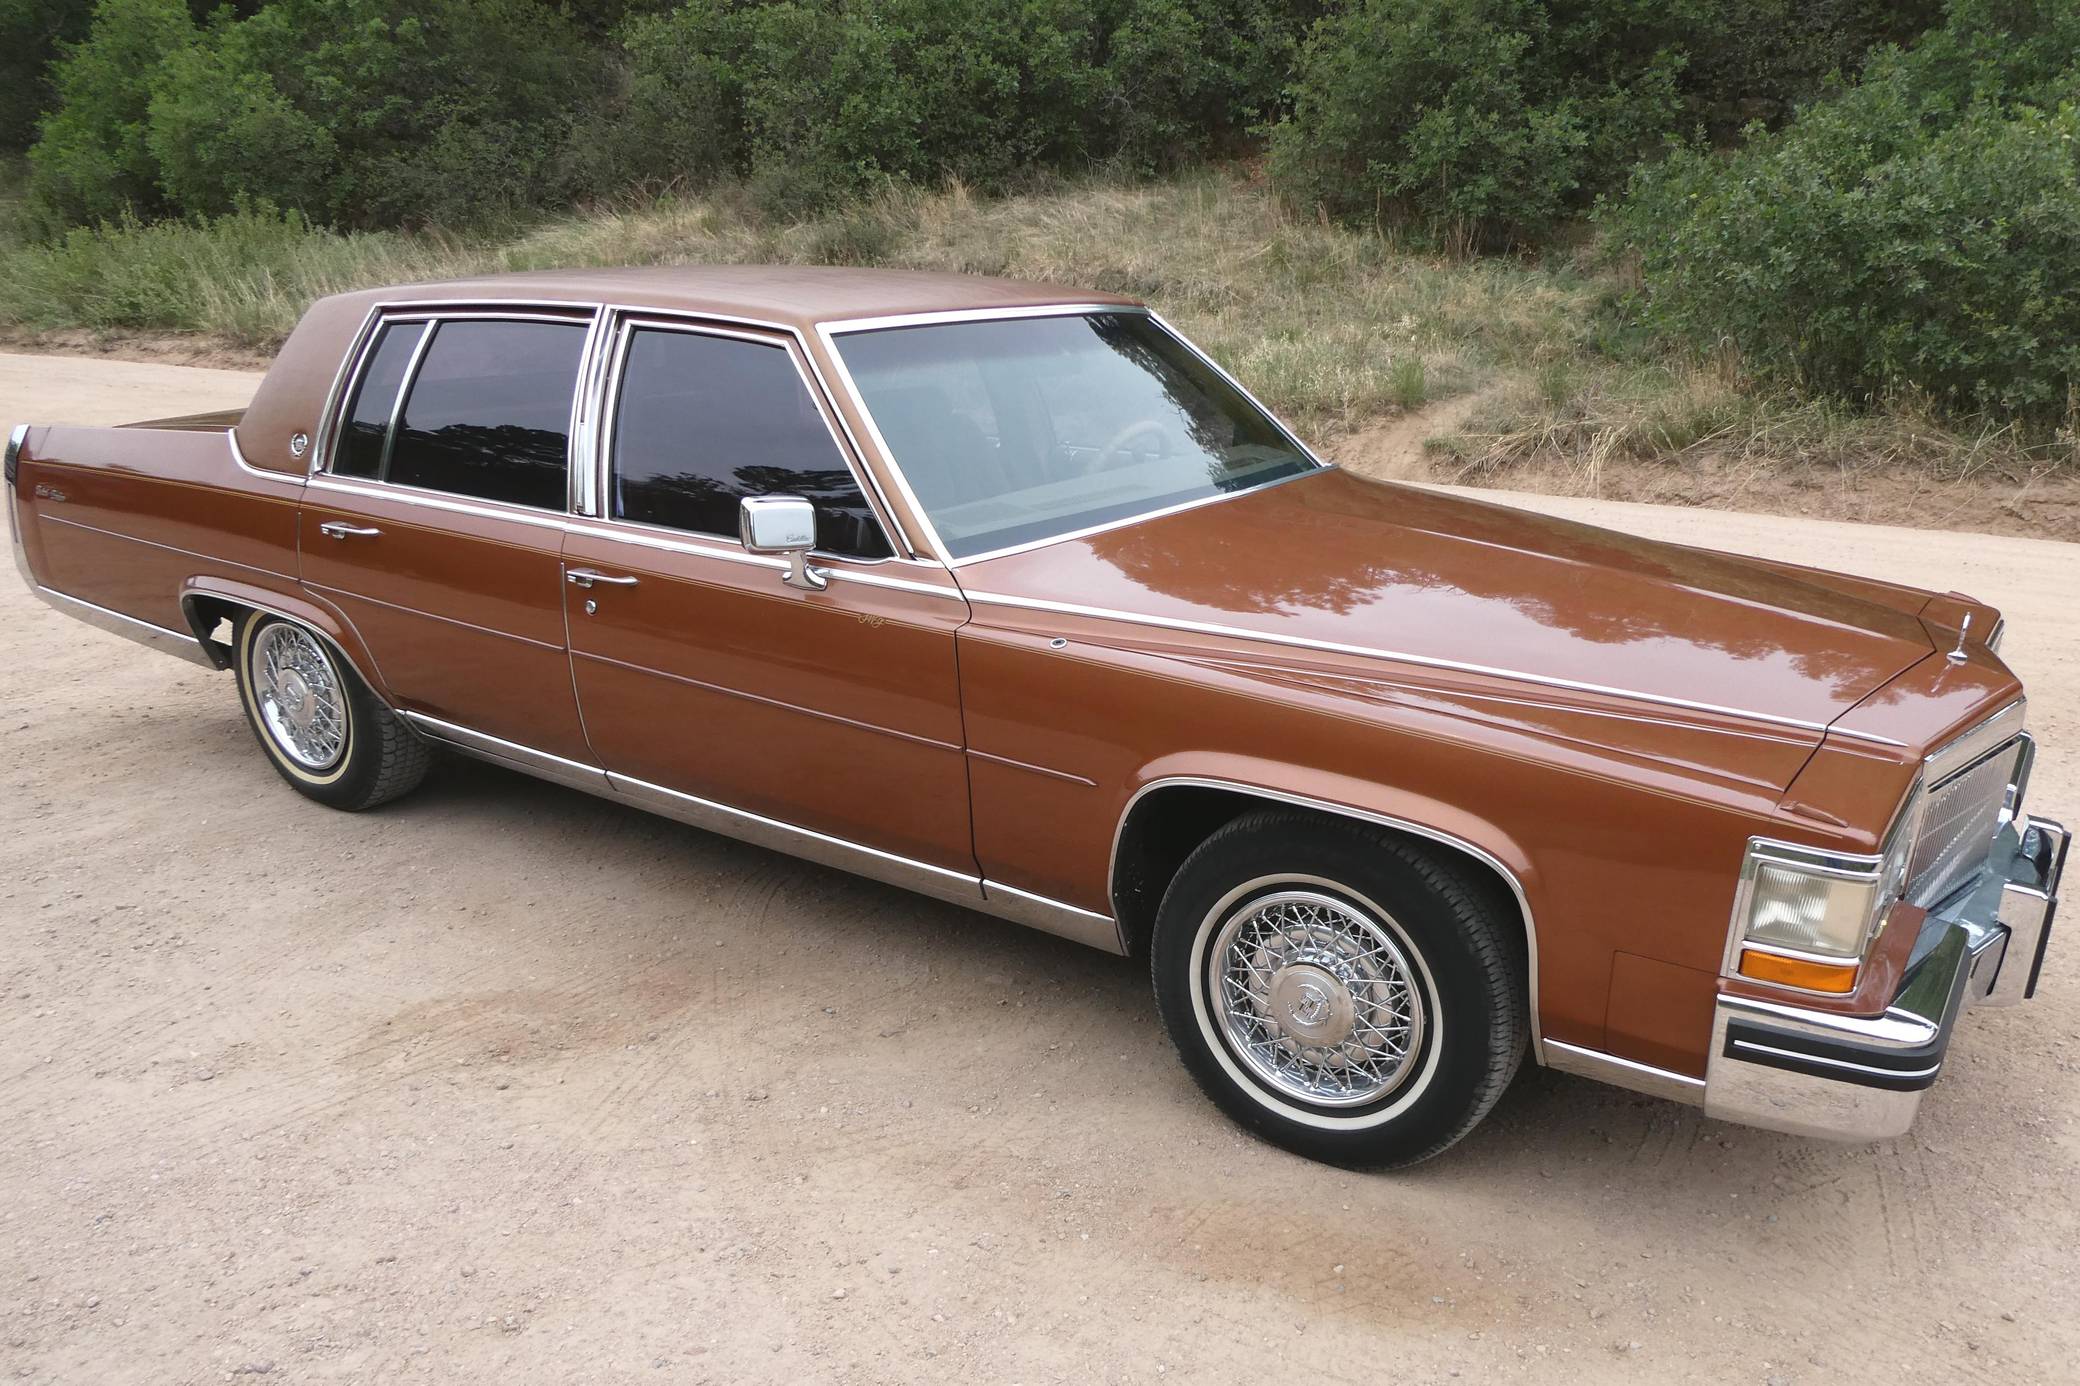 Sold - Low-Mileage, Clean 1984 Cadillac Deville